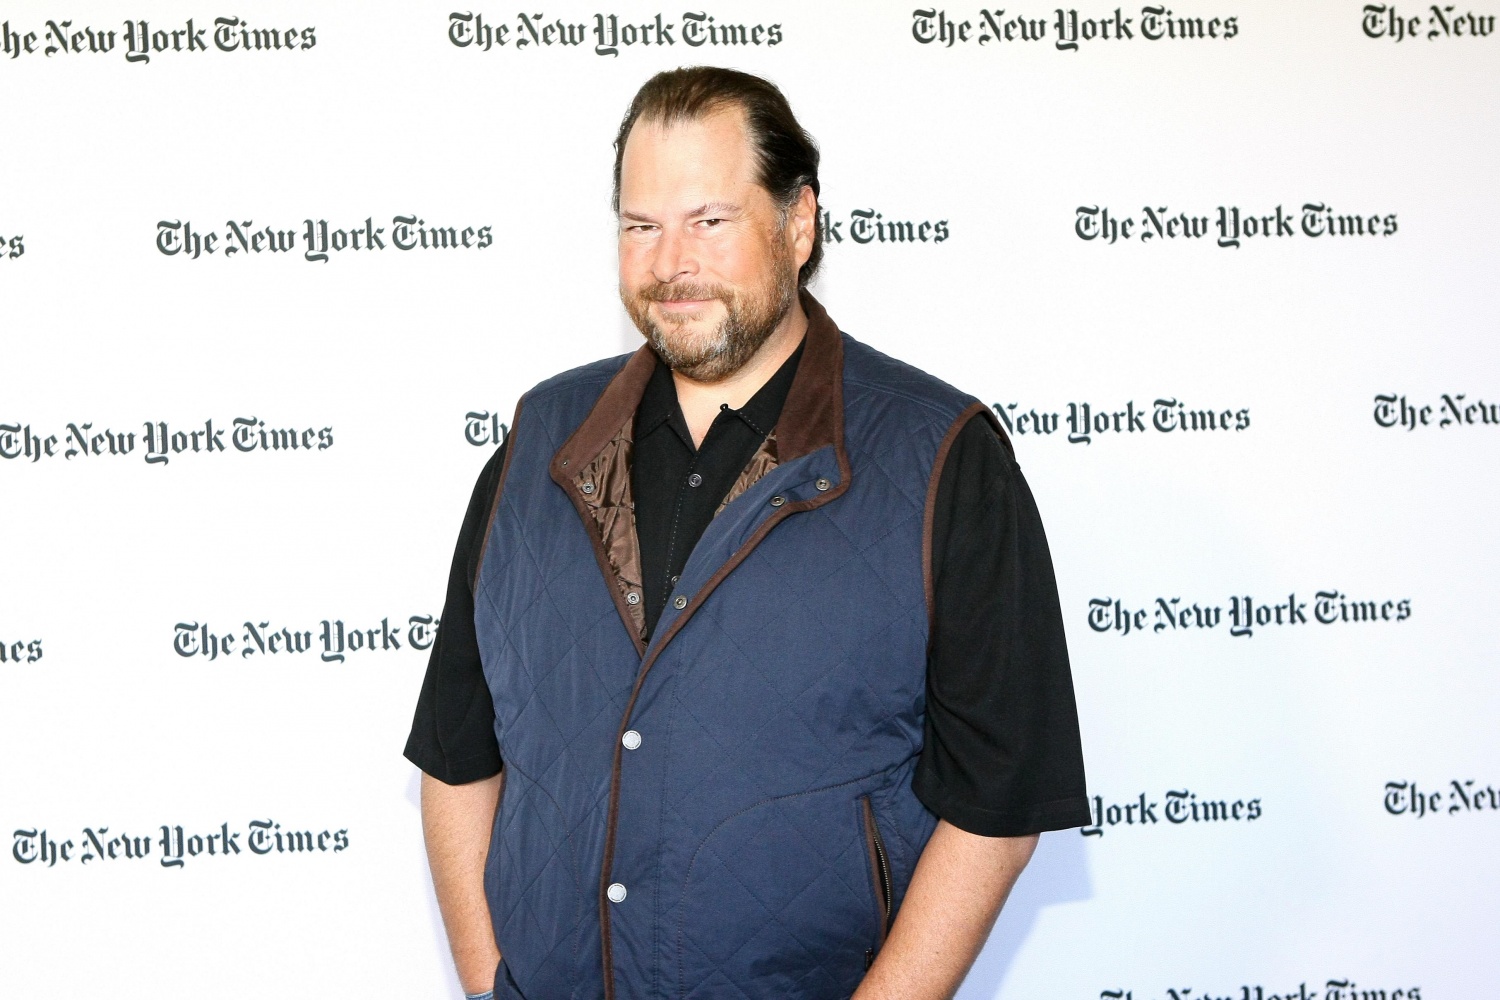 Facts About Marc Benioff